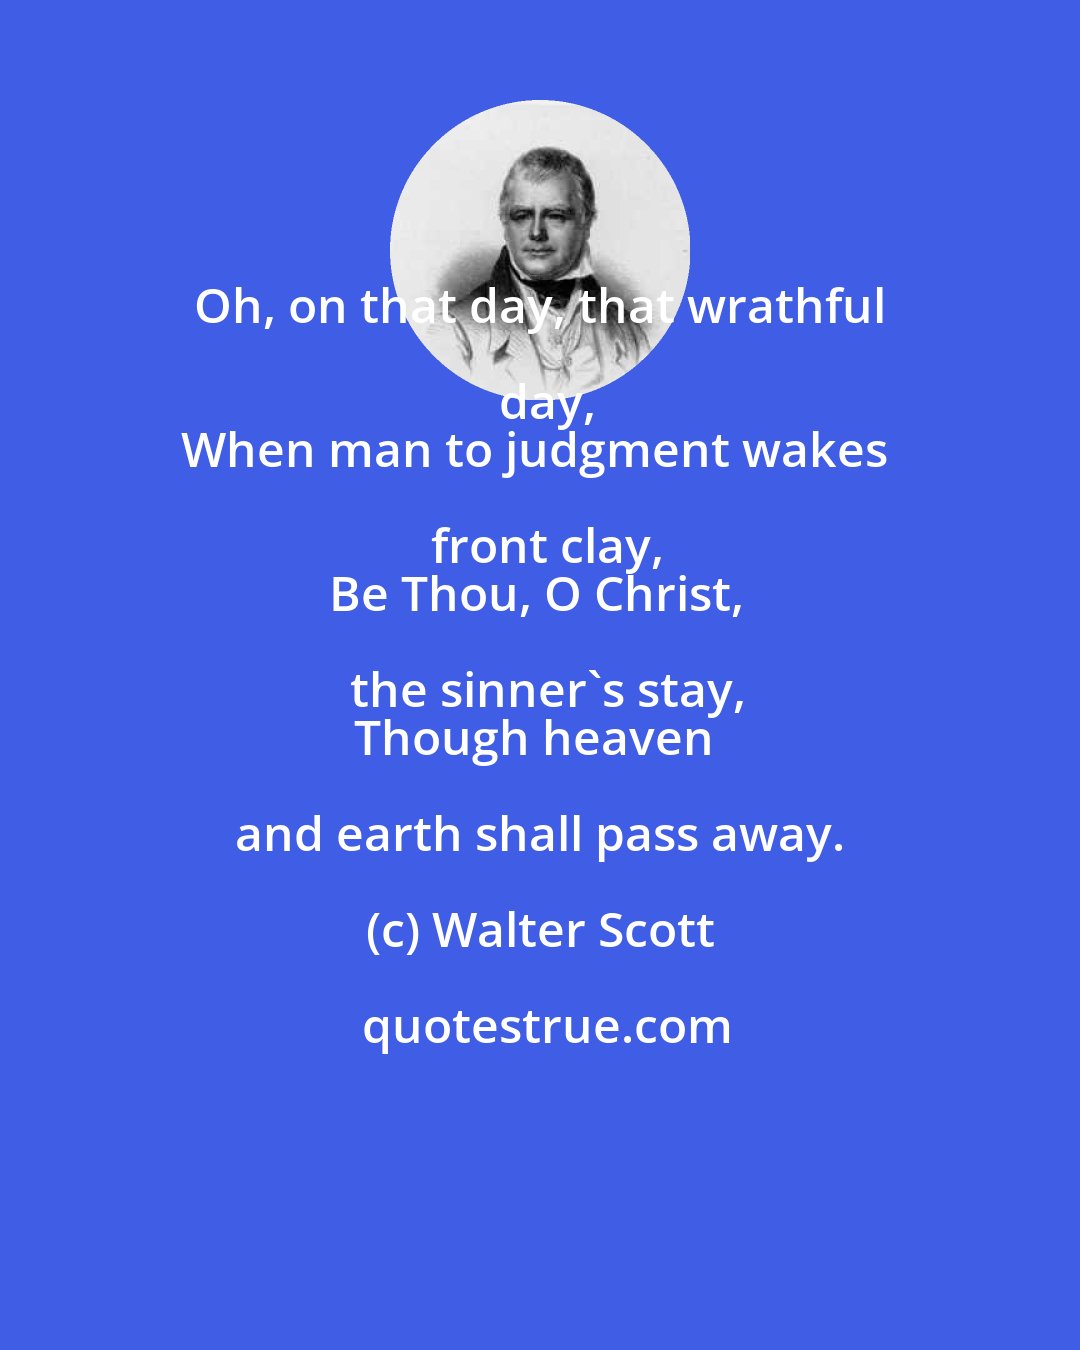 Walter Scott: Oh, on that day, that wrathful day,
When man to judgment wakes front clay,
Be Thou, O Christ, the sinner's stay,
Though heaven and earth shall pass away.